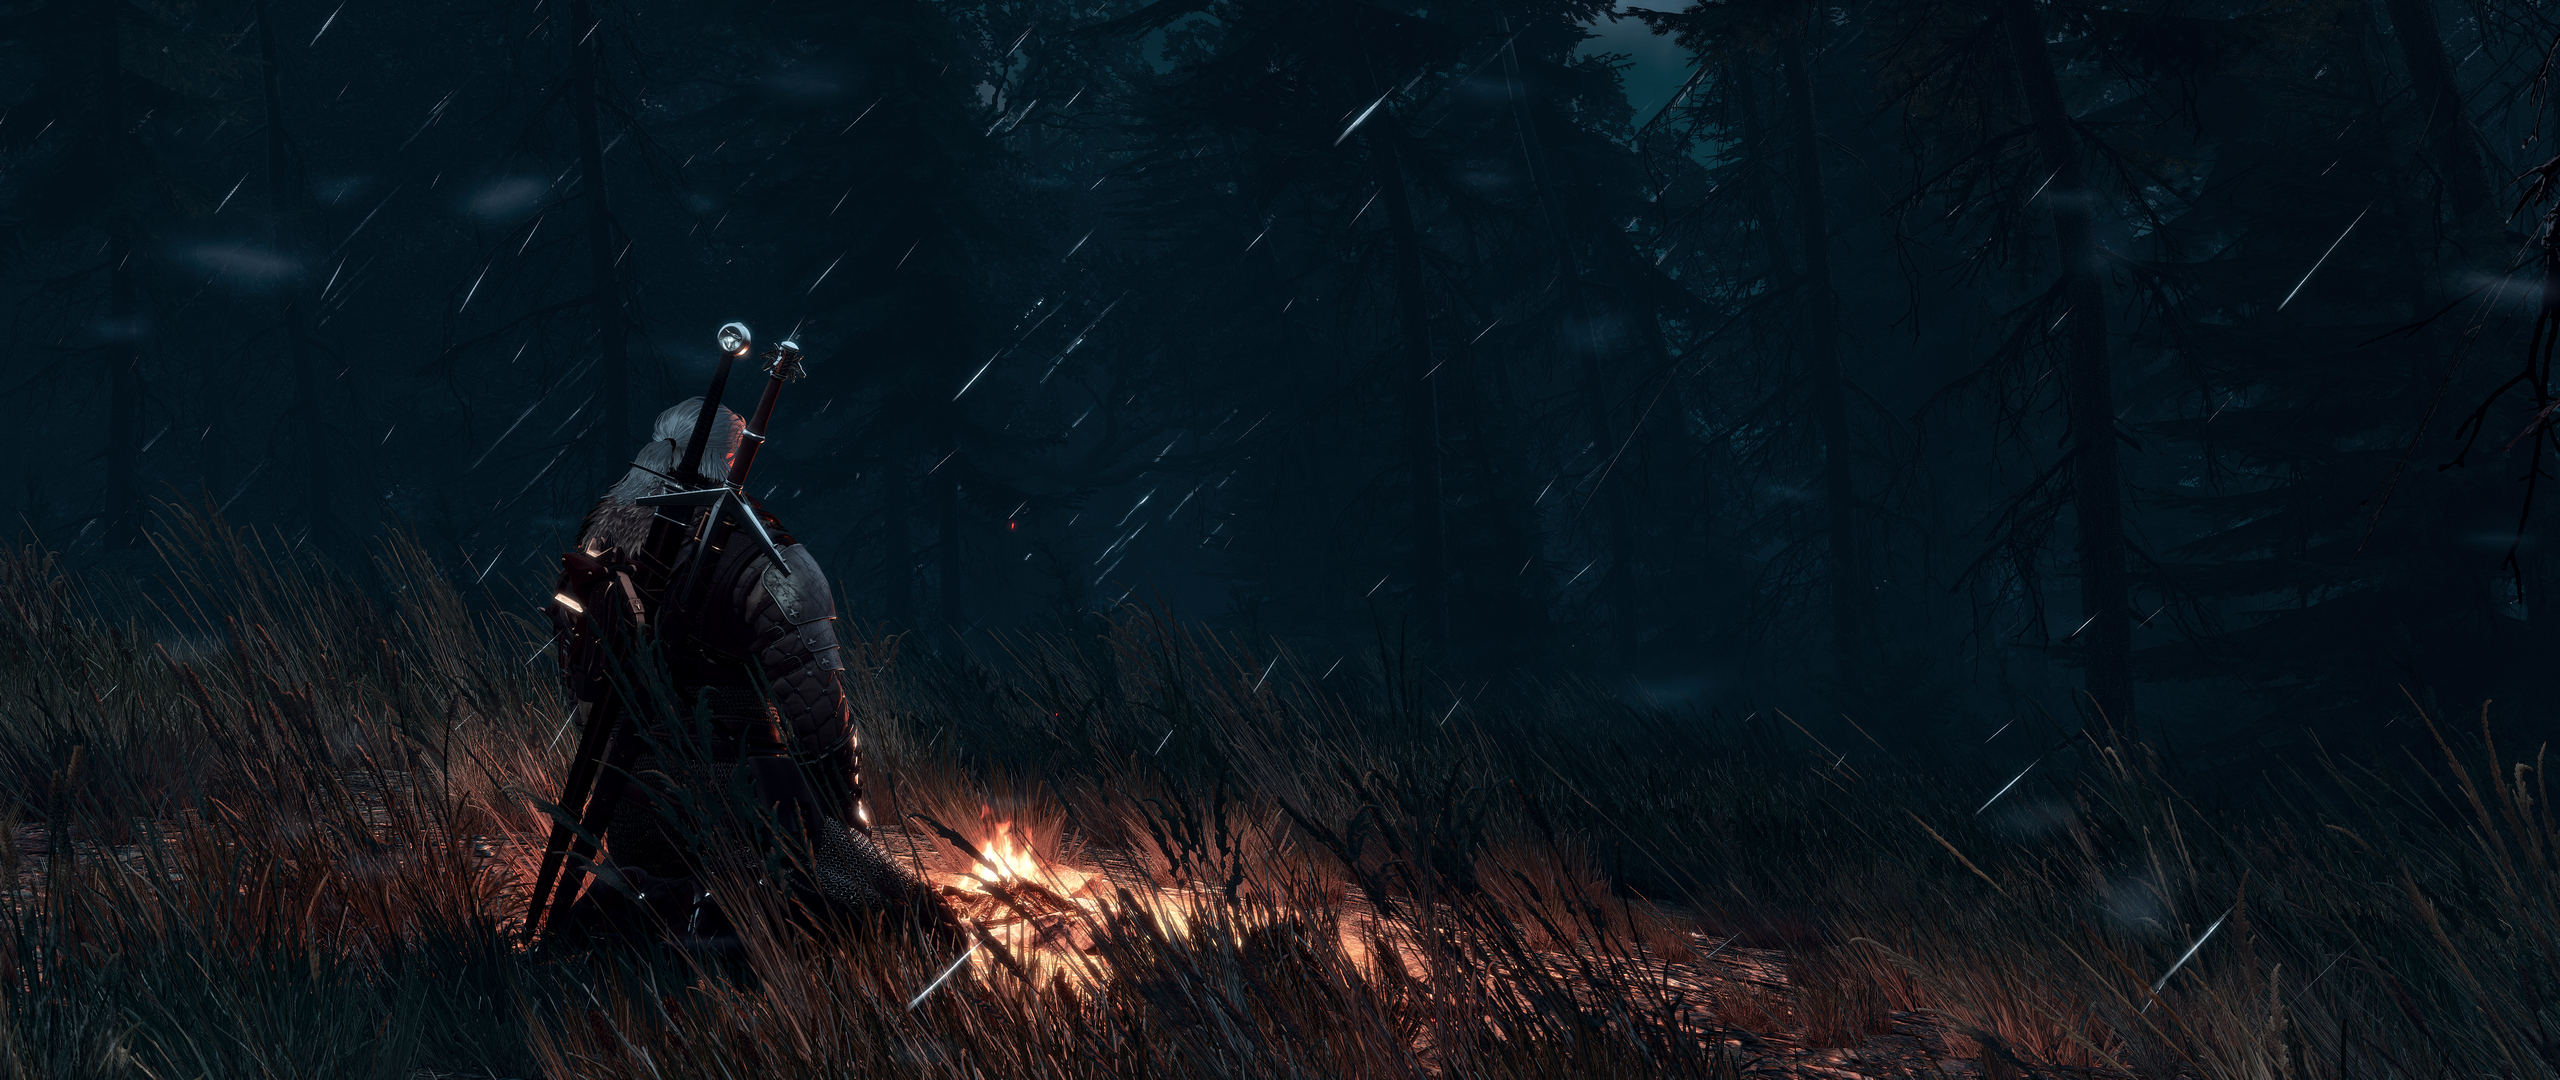 night, meditation, the witcher, video game, the witcher 3: wild hunt, bonfire, fire, geralt of rivia 4K Ultra